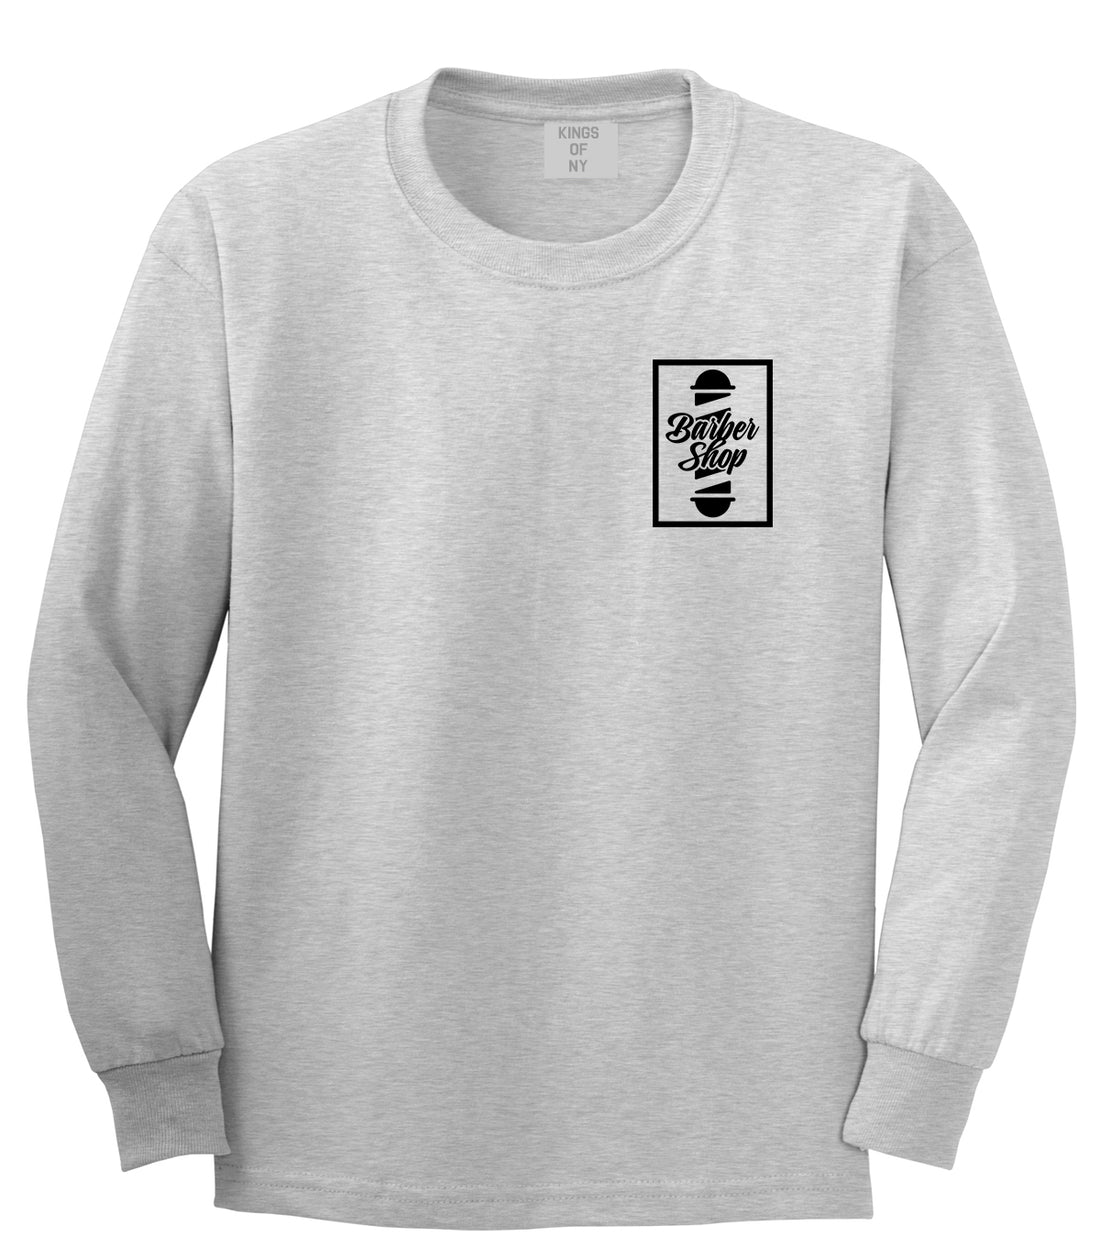 Barbershop Pole Chest Grey Long Sleeve T-Shirt by Kings Of NY